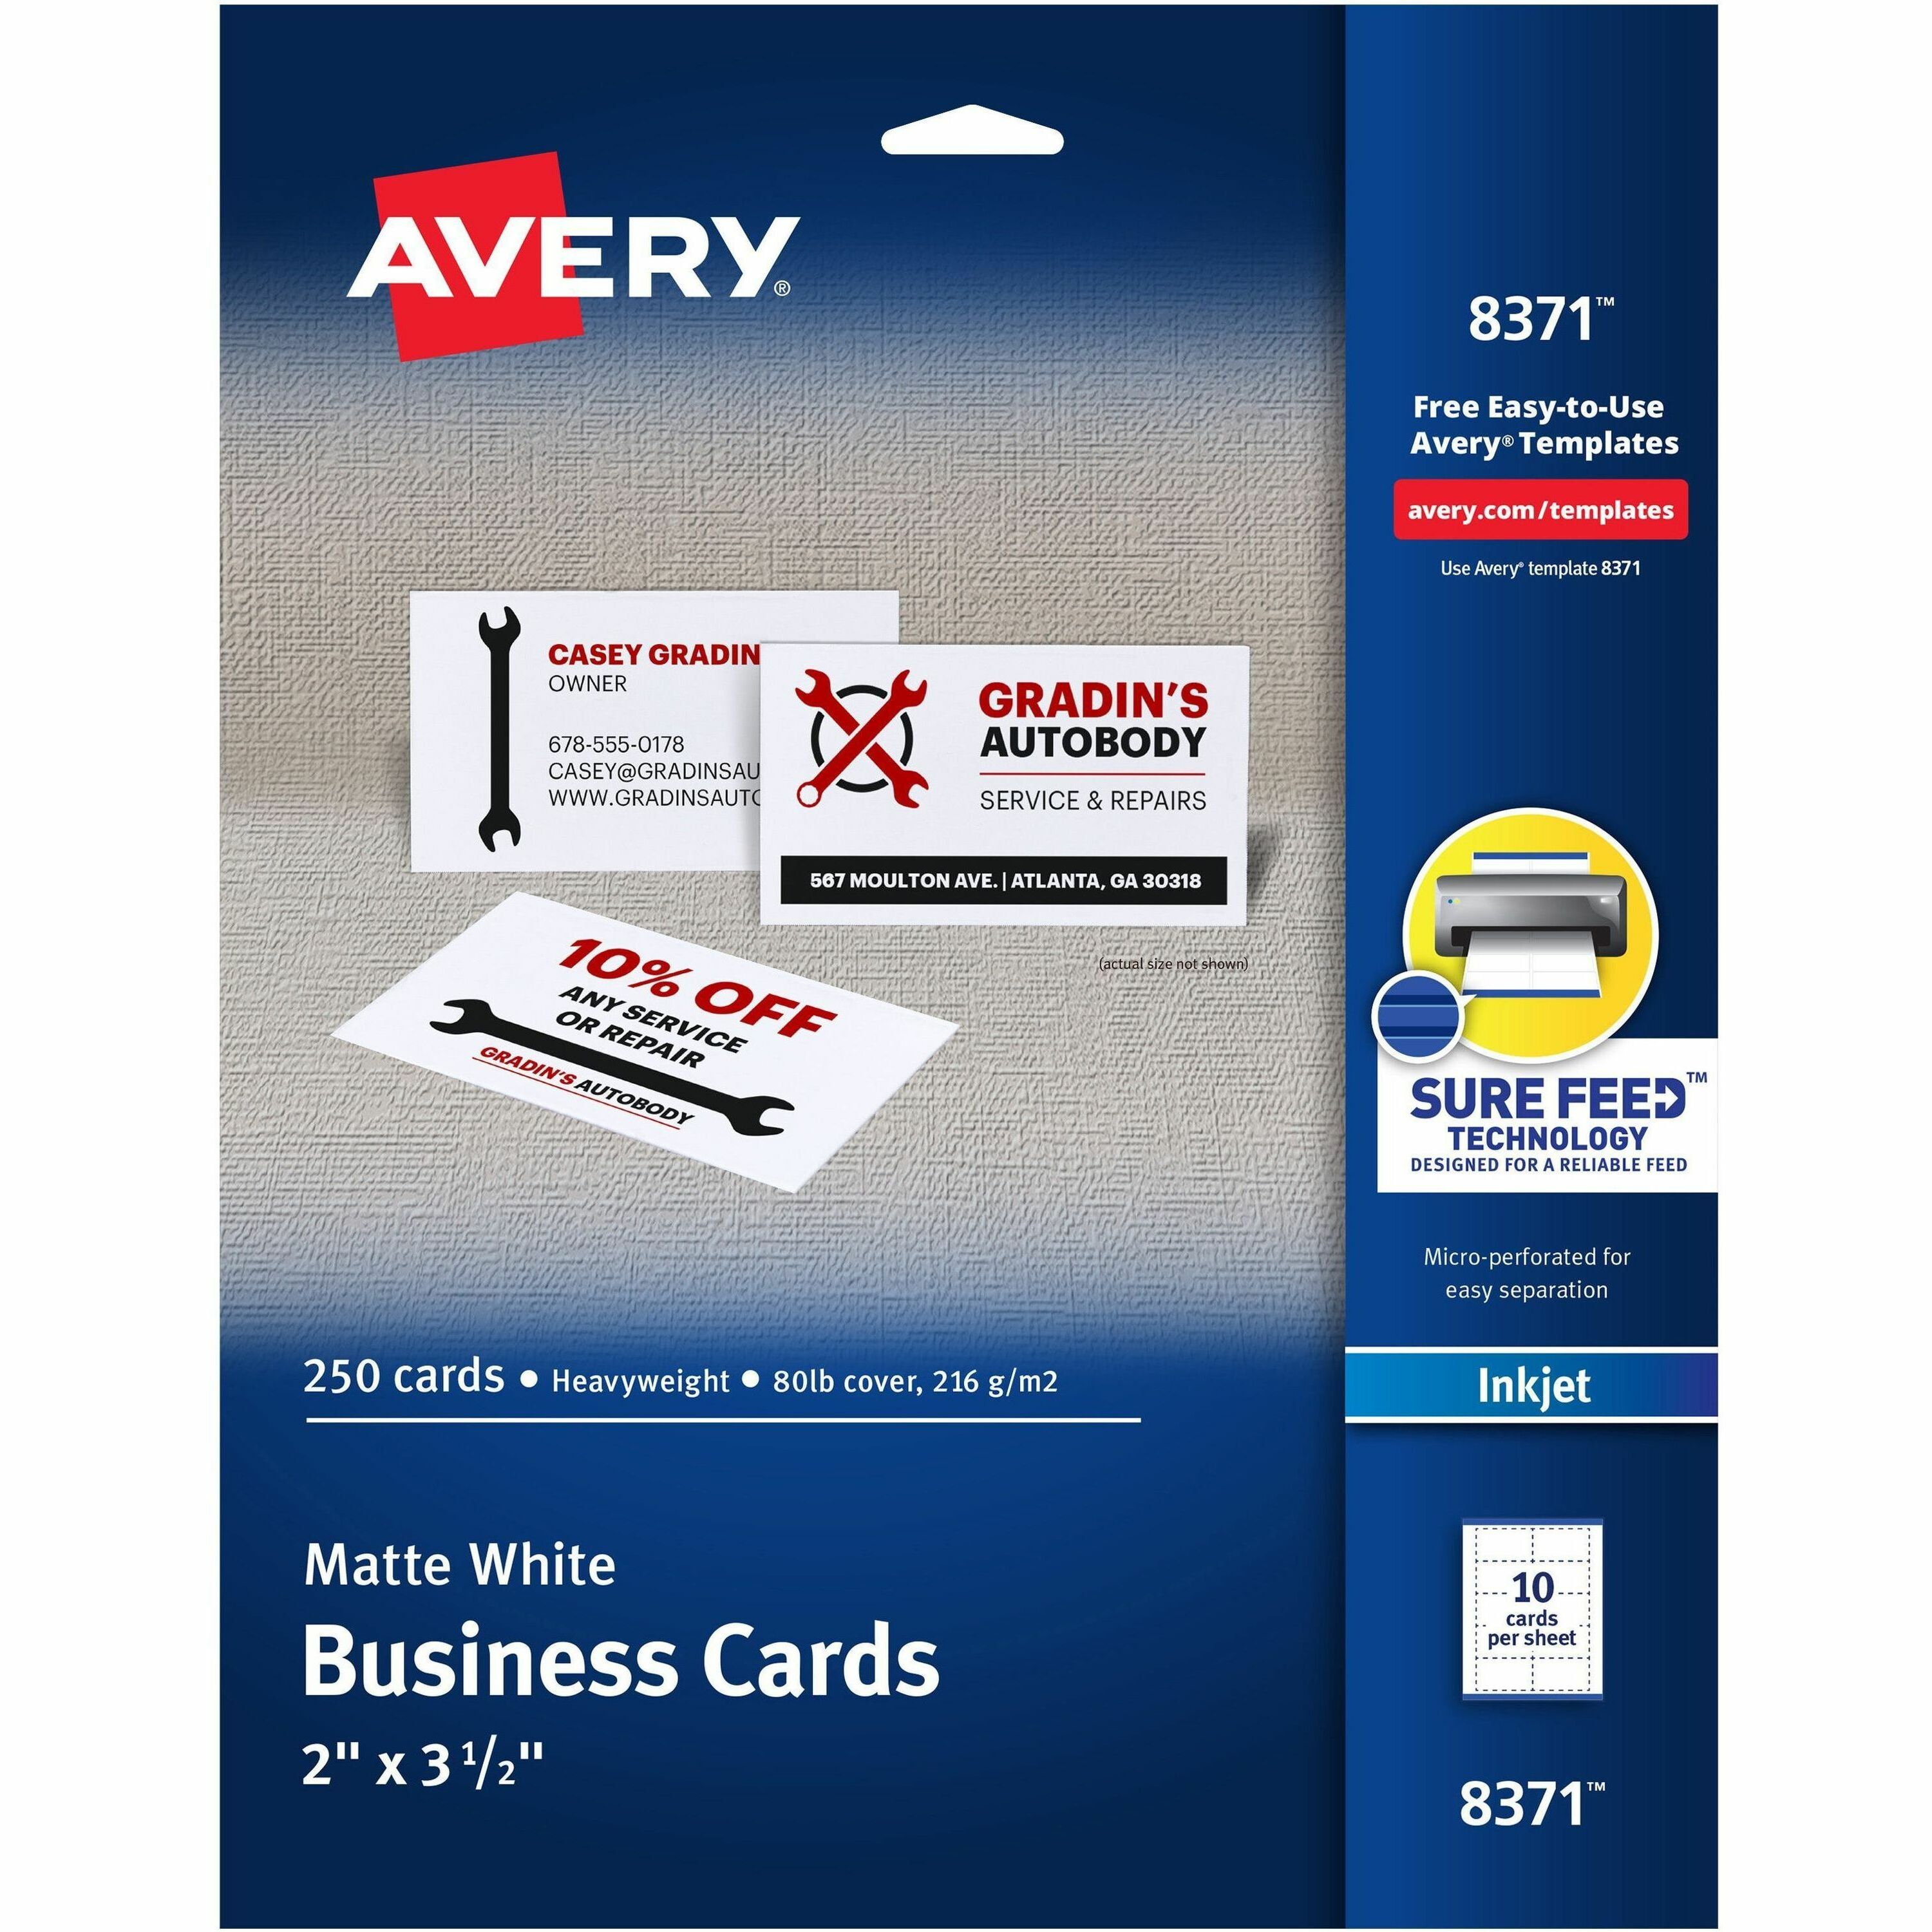 avery-sure-feed-business-cards